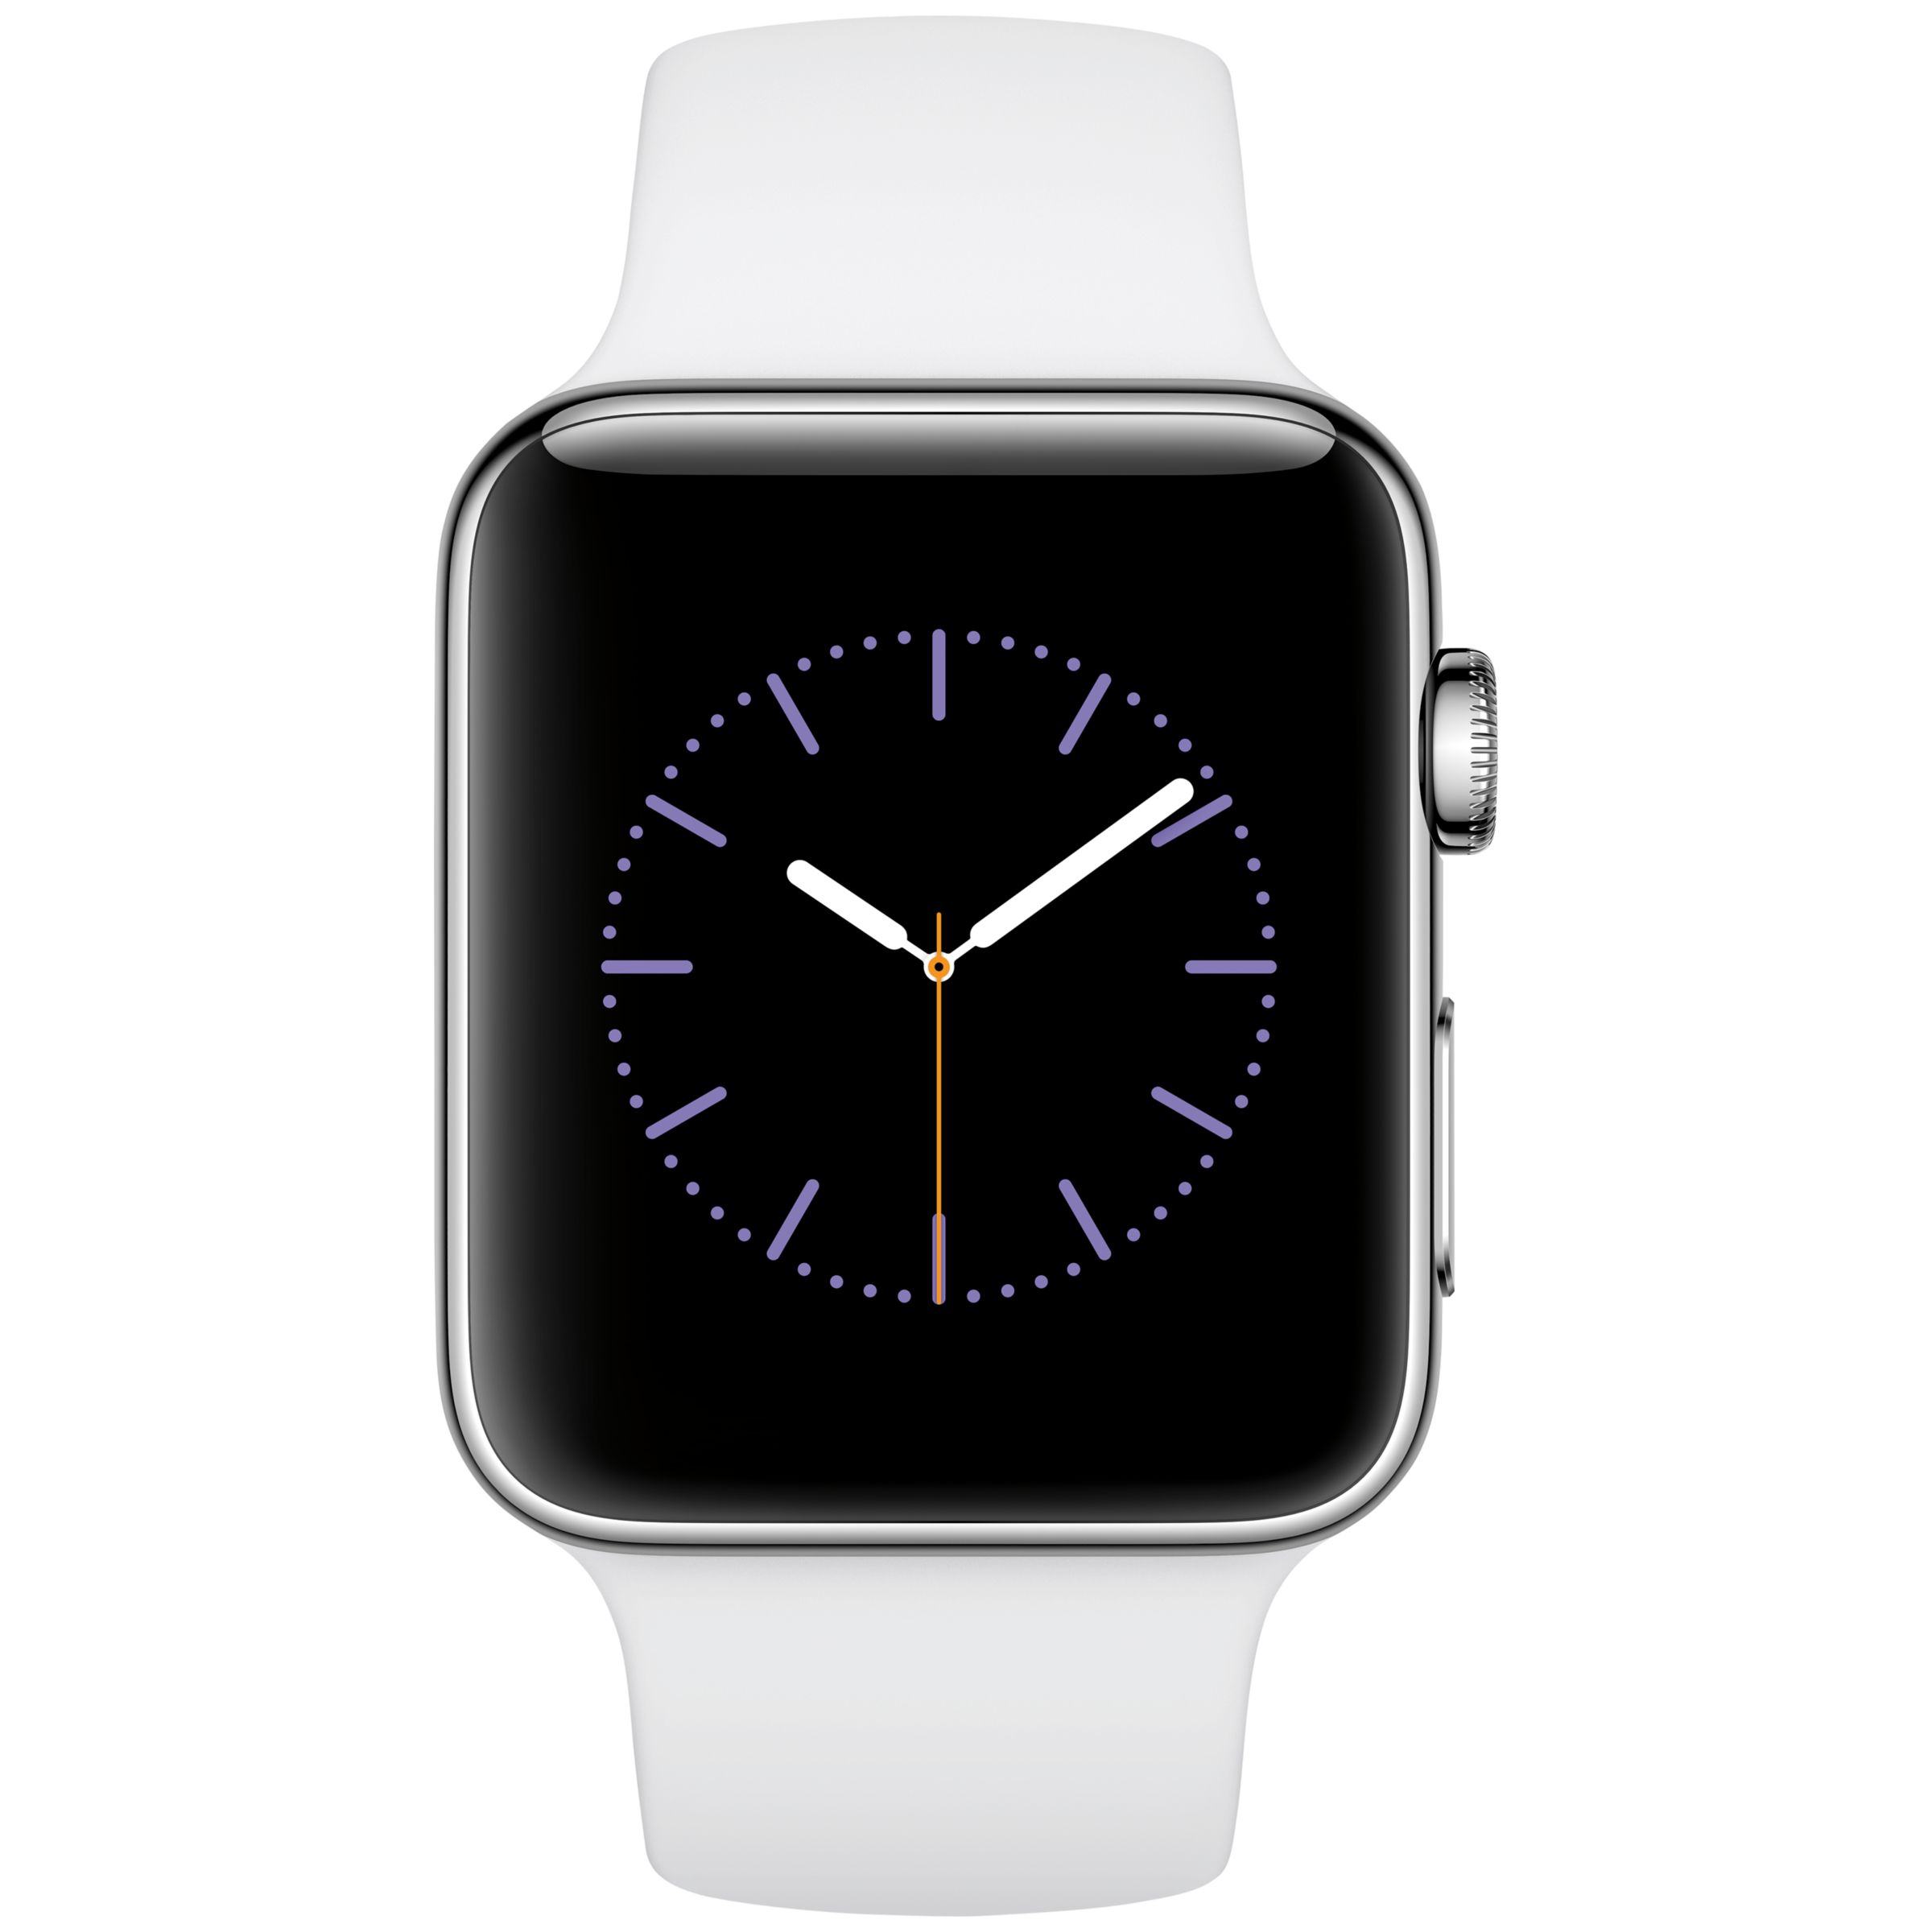 Apple Watch Series 2 42mm Stainless Steel Case With Sport Band White At John Lewis Partners